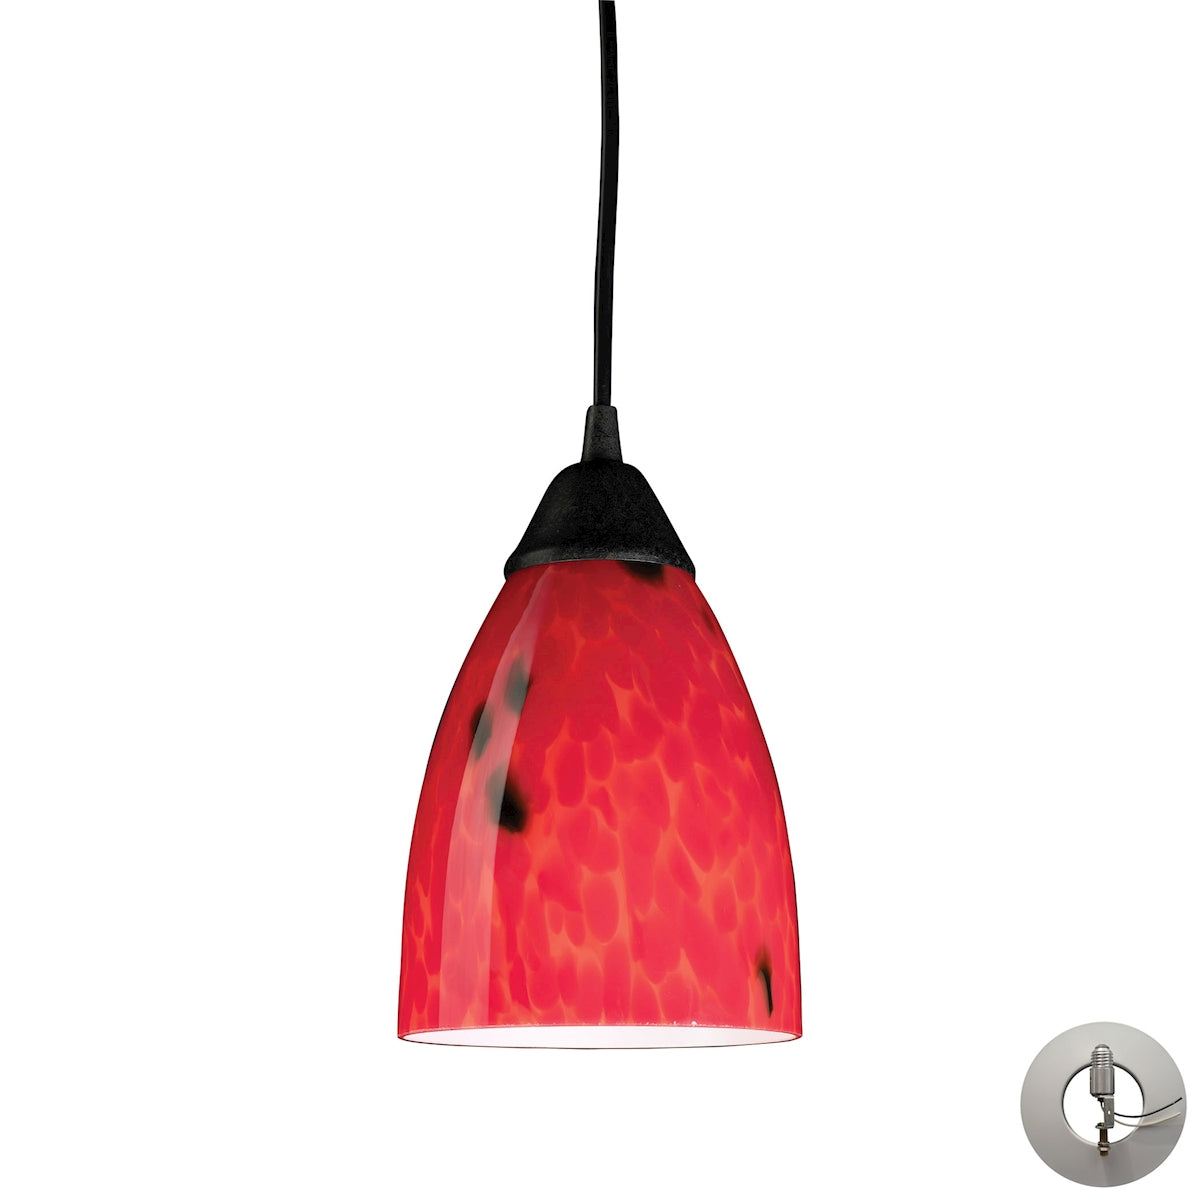 Classico 1-Light Mini Pendant in Dark Rust with Fire Red Glass - Includes Adapter Kit